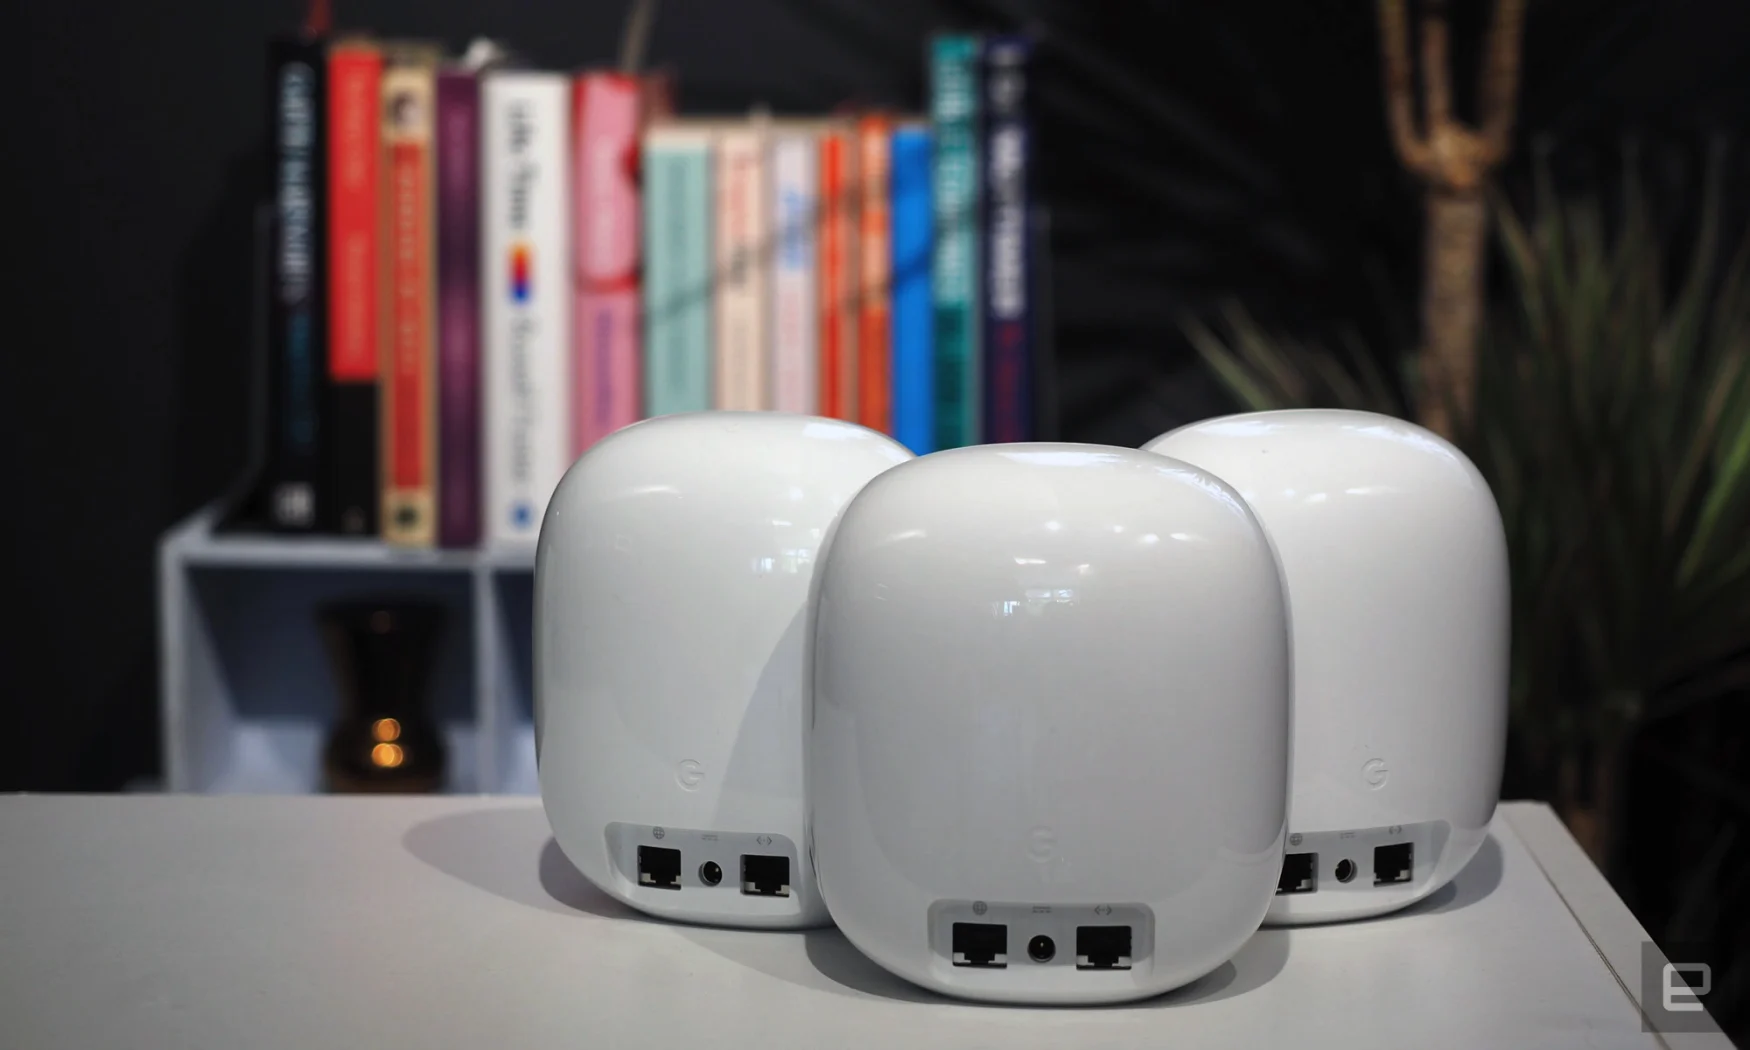 Image of three Nest WiFi Pro units, rear-on, in front of a blurred bookcase.